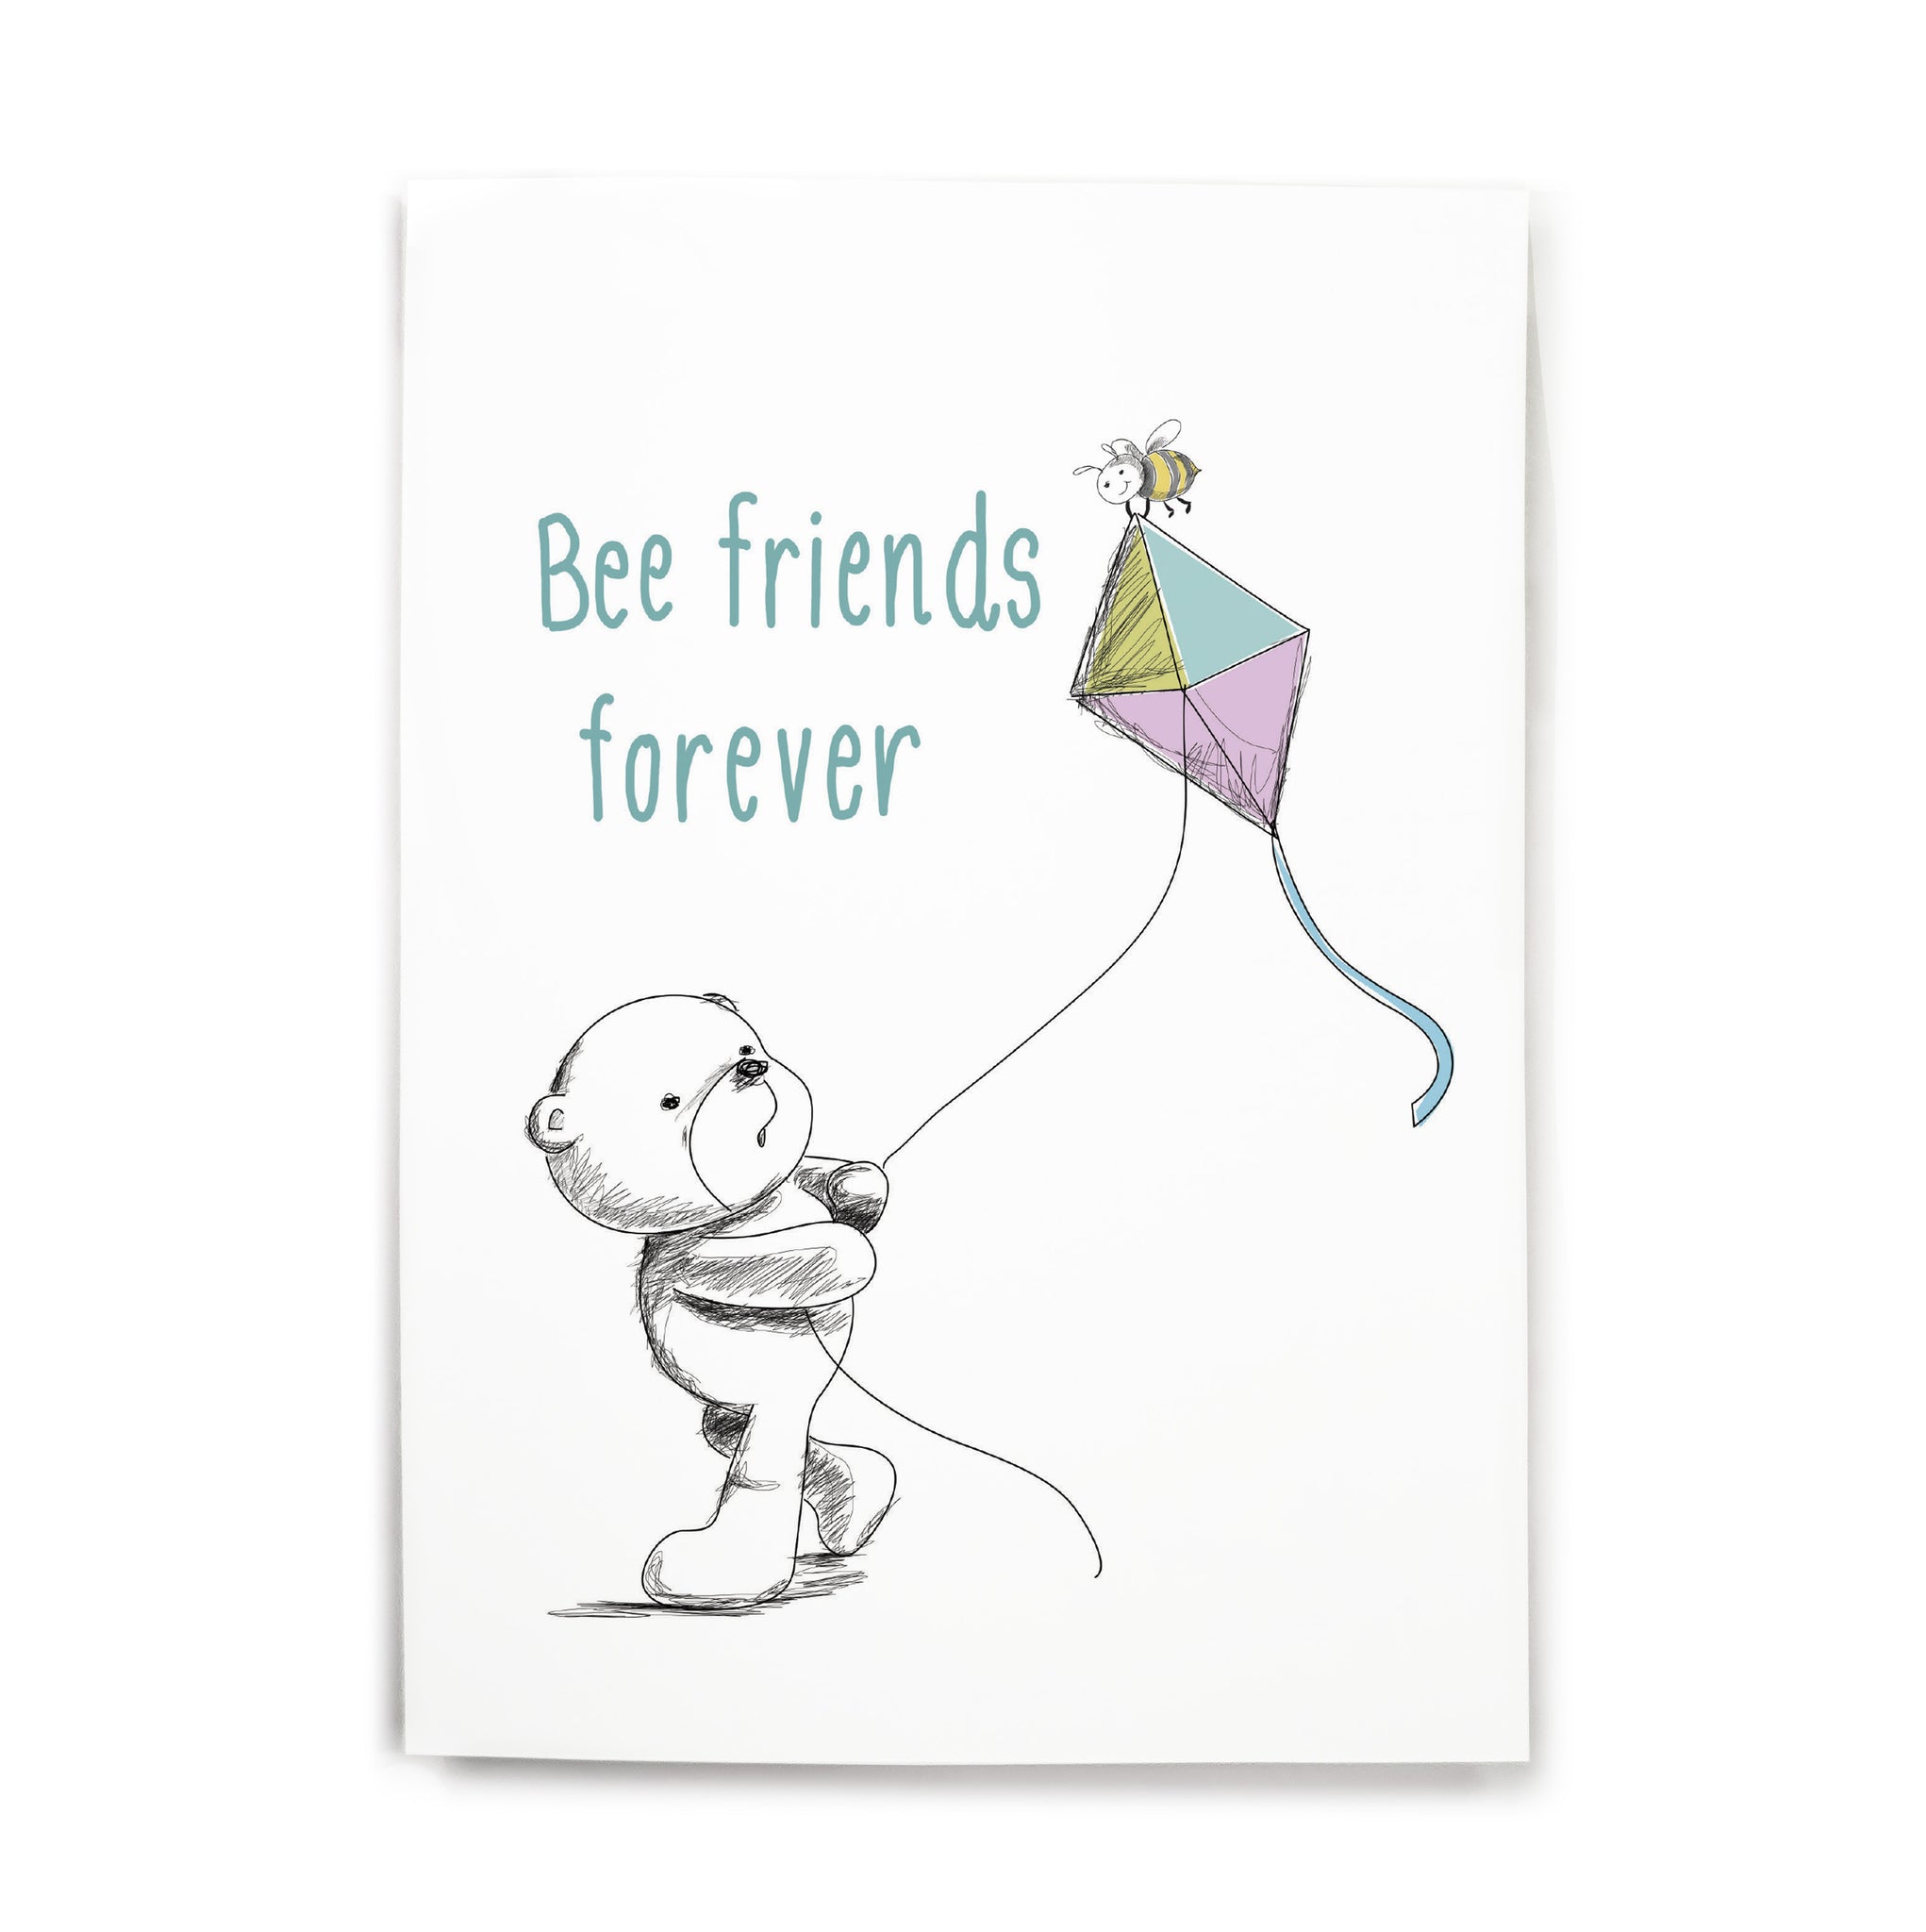 Bee friends forever